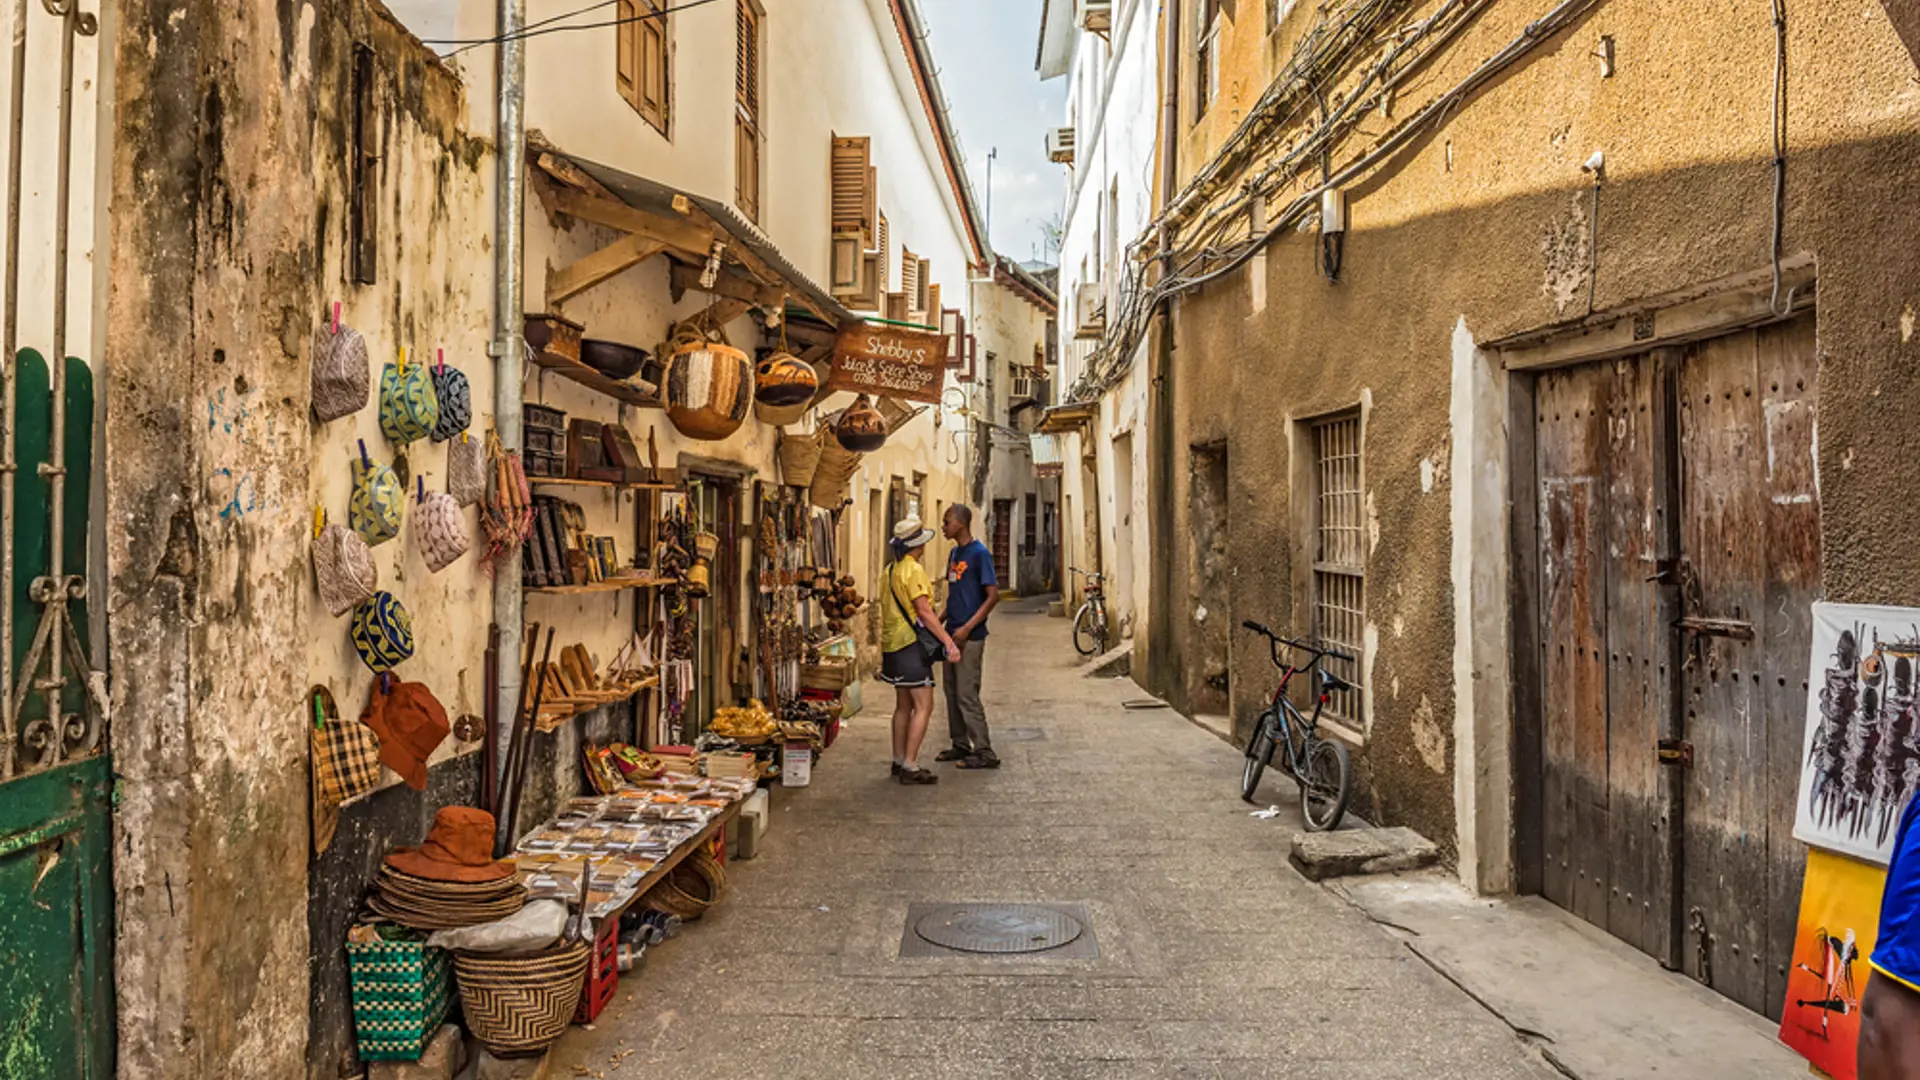 Tourists On A Typical Narrow Street In Stone Town.